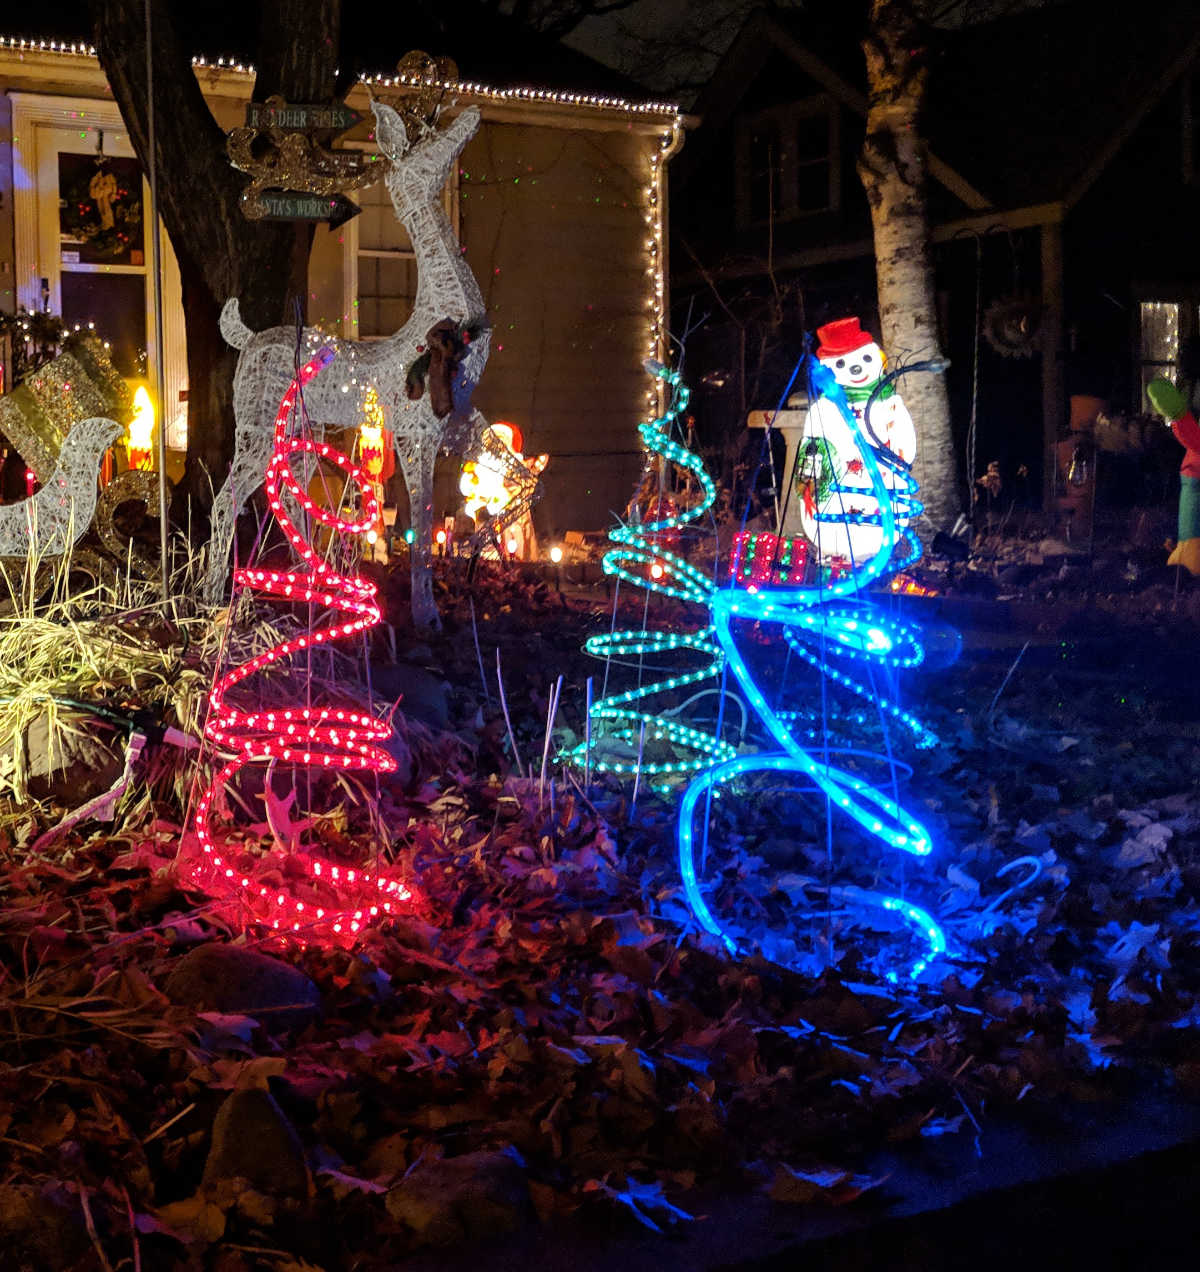 Lighted trees and snowman in holiday display in yard at night